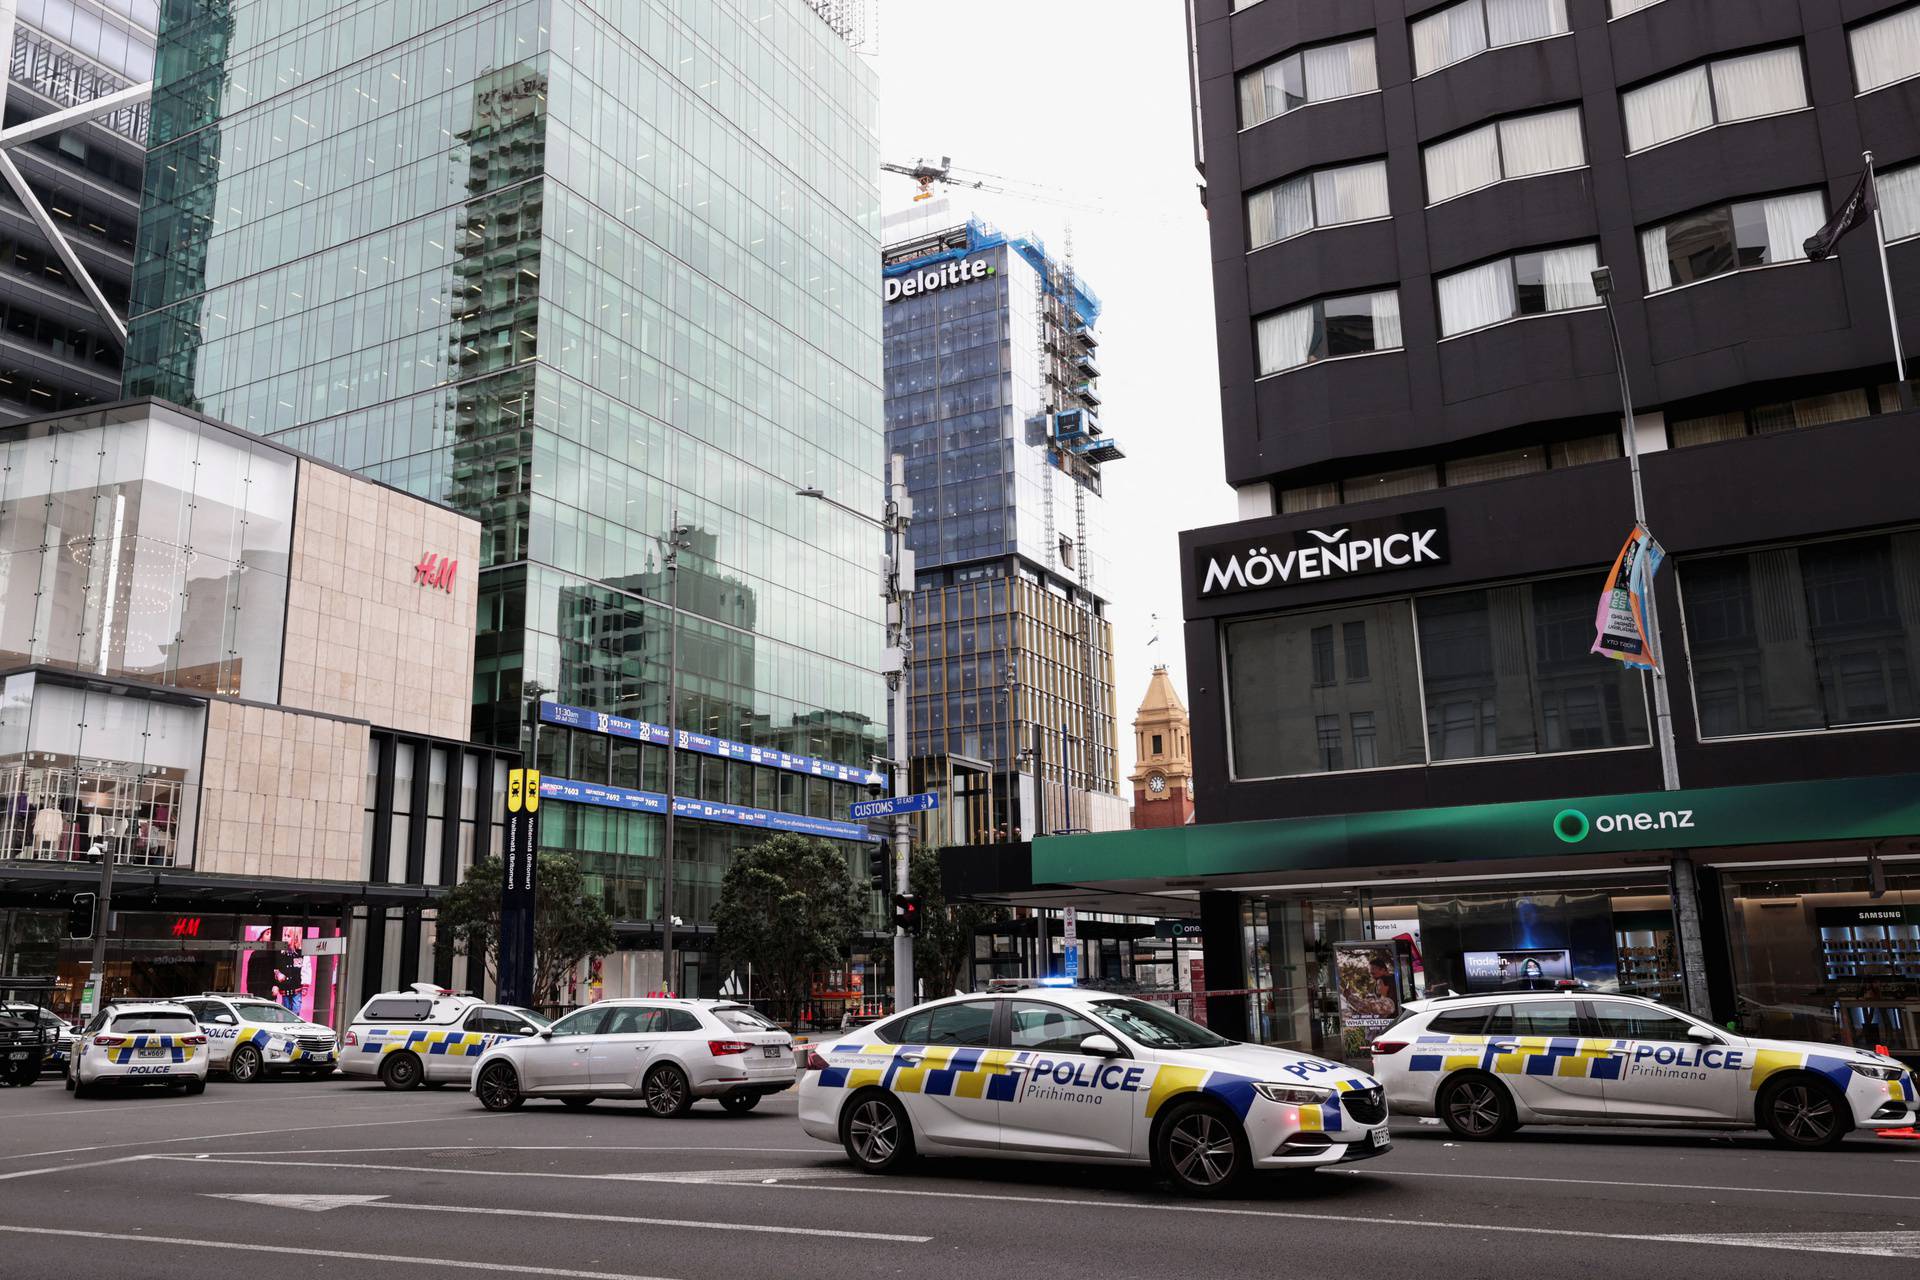 Police cars are seen near a construction site following a shooting in the central business district, in Auckland